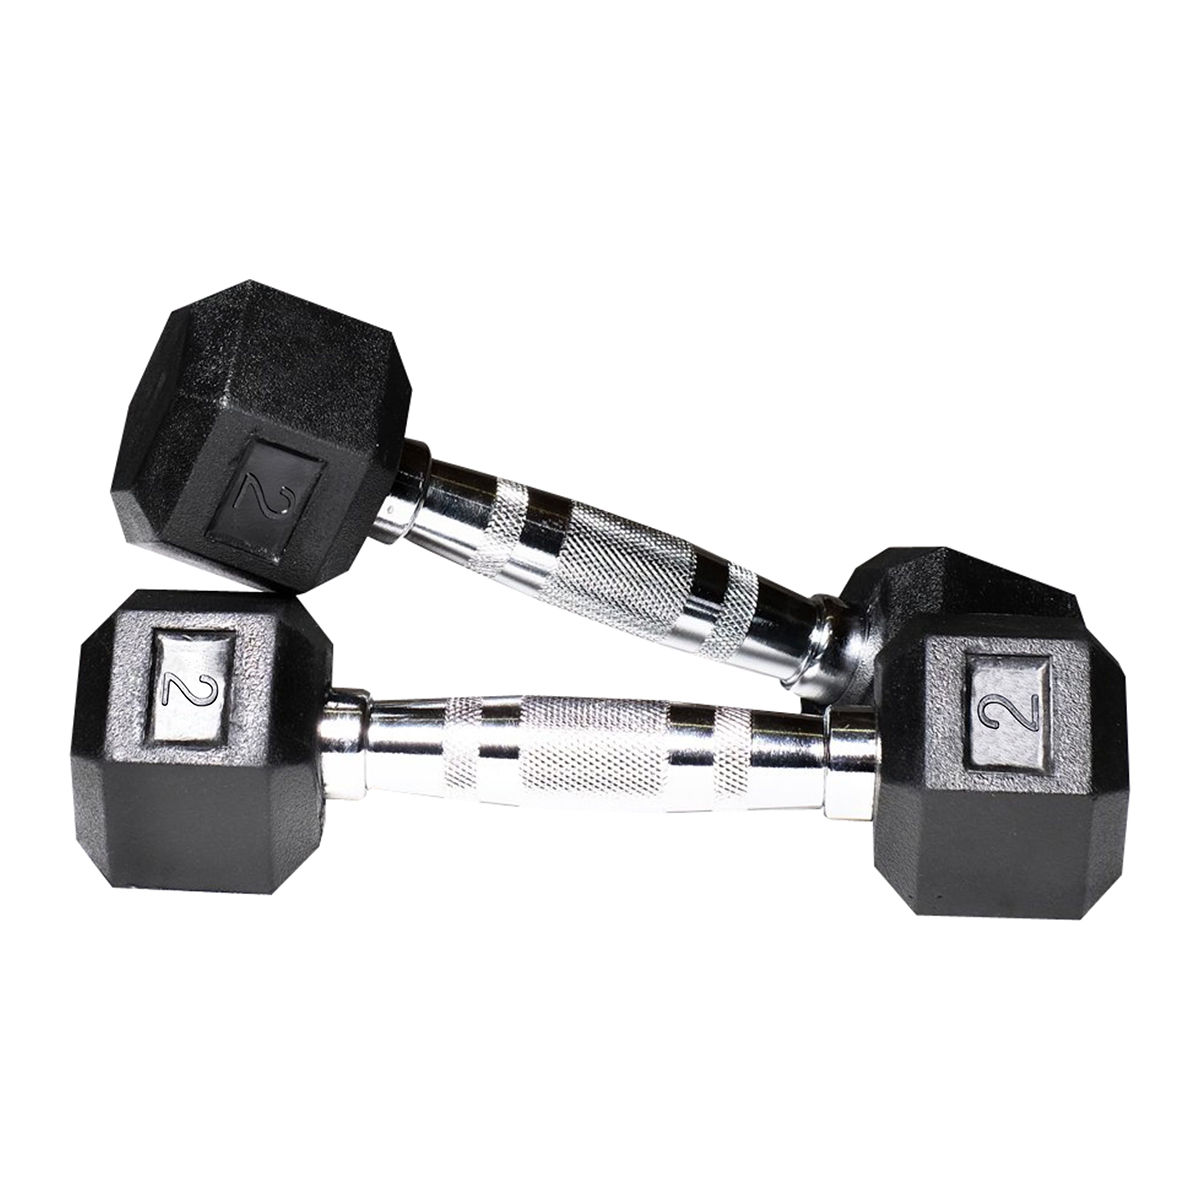 Fitzon Rubber Coated Professional 2 KG Hexa Dumbbells Home Gym Exercise Equipment (Set of 2)